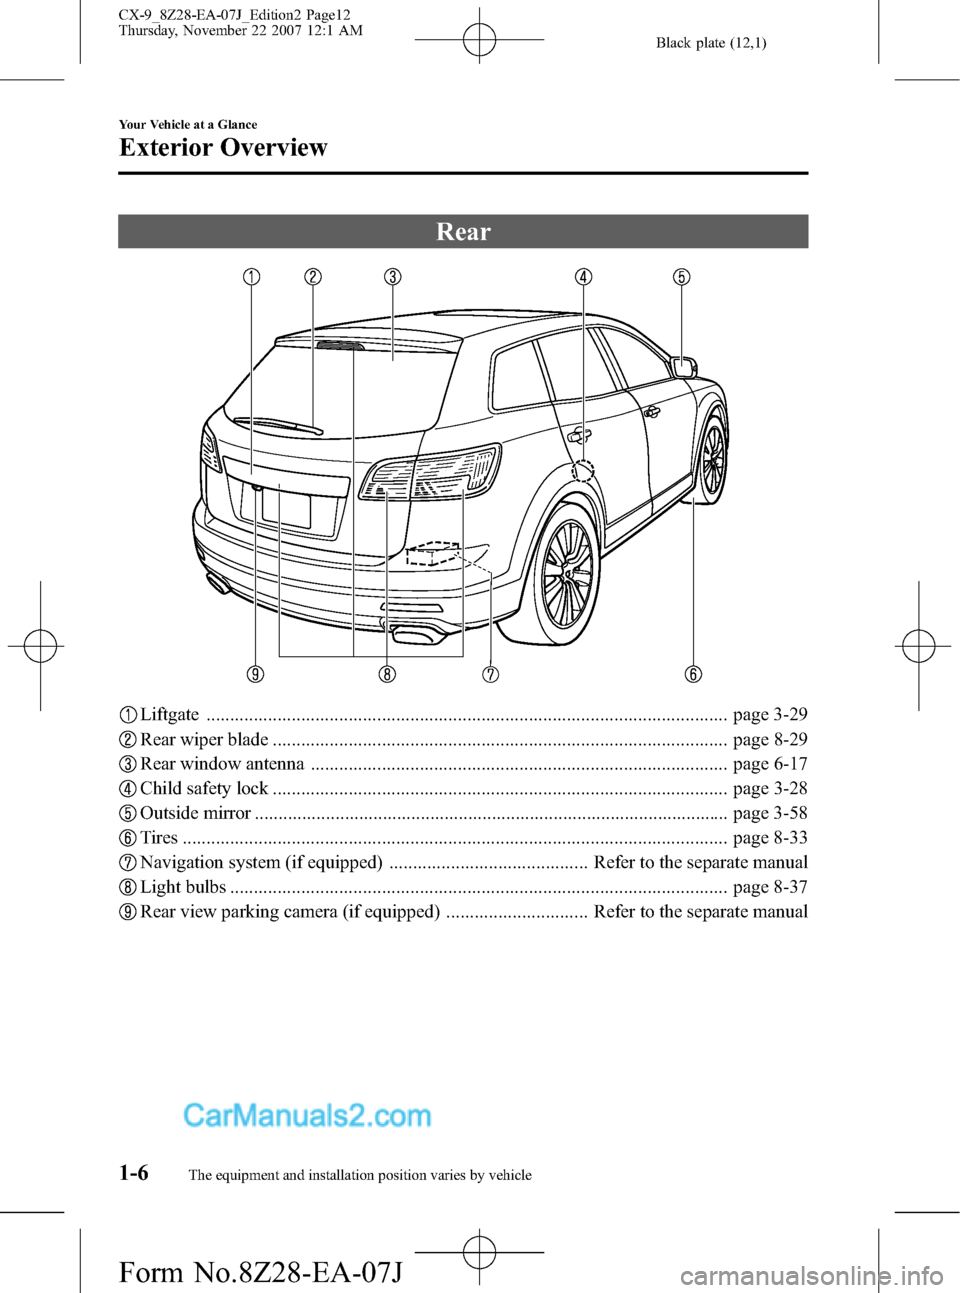 MAZDA MODEL CX-9 2008  Owners Manual (in English) Black plate (12,1)
Rear
Liftgate .............................................................................................................. page 3-29
Rear wiper blade .............................